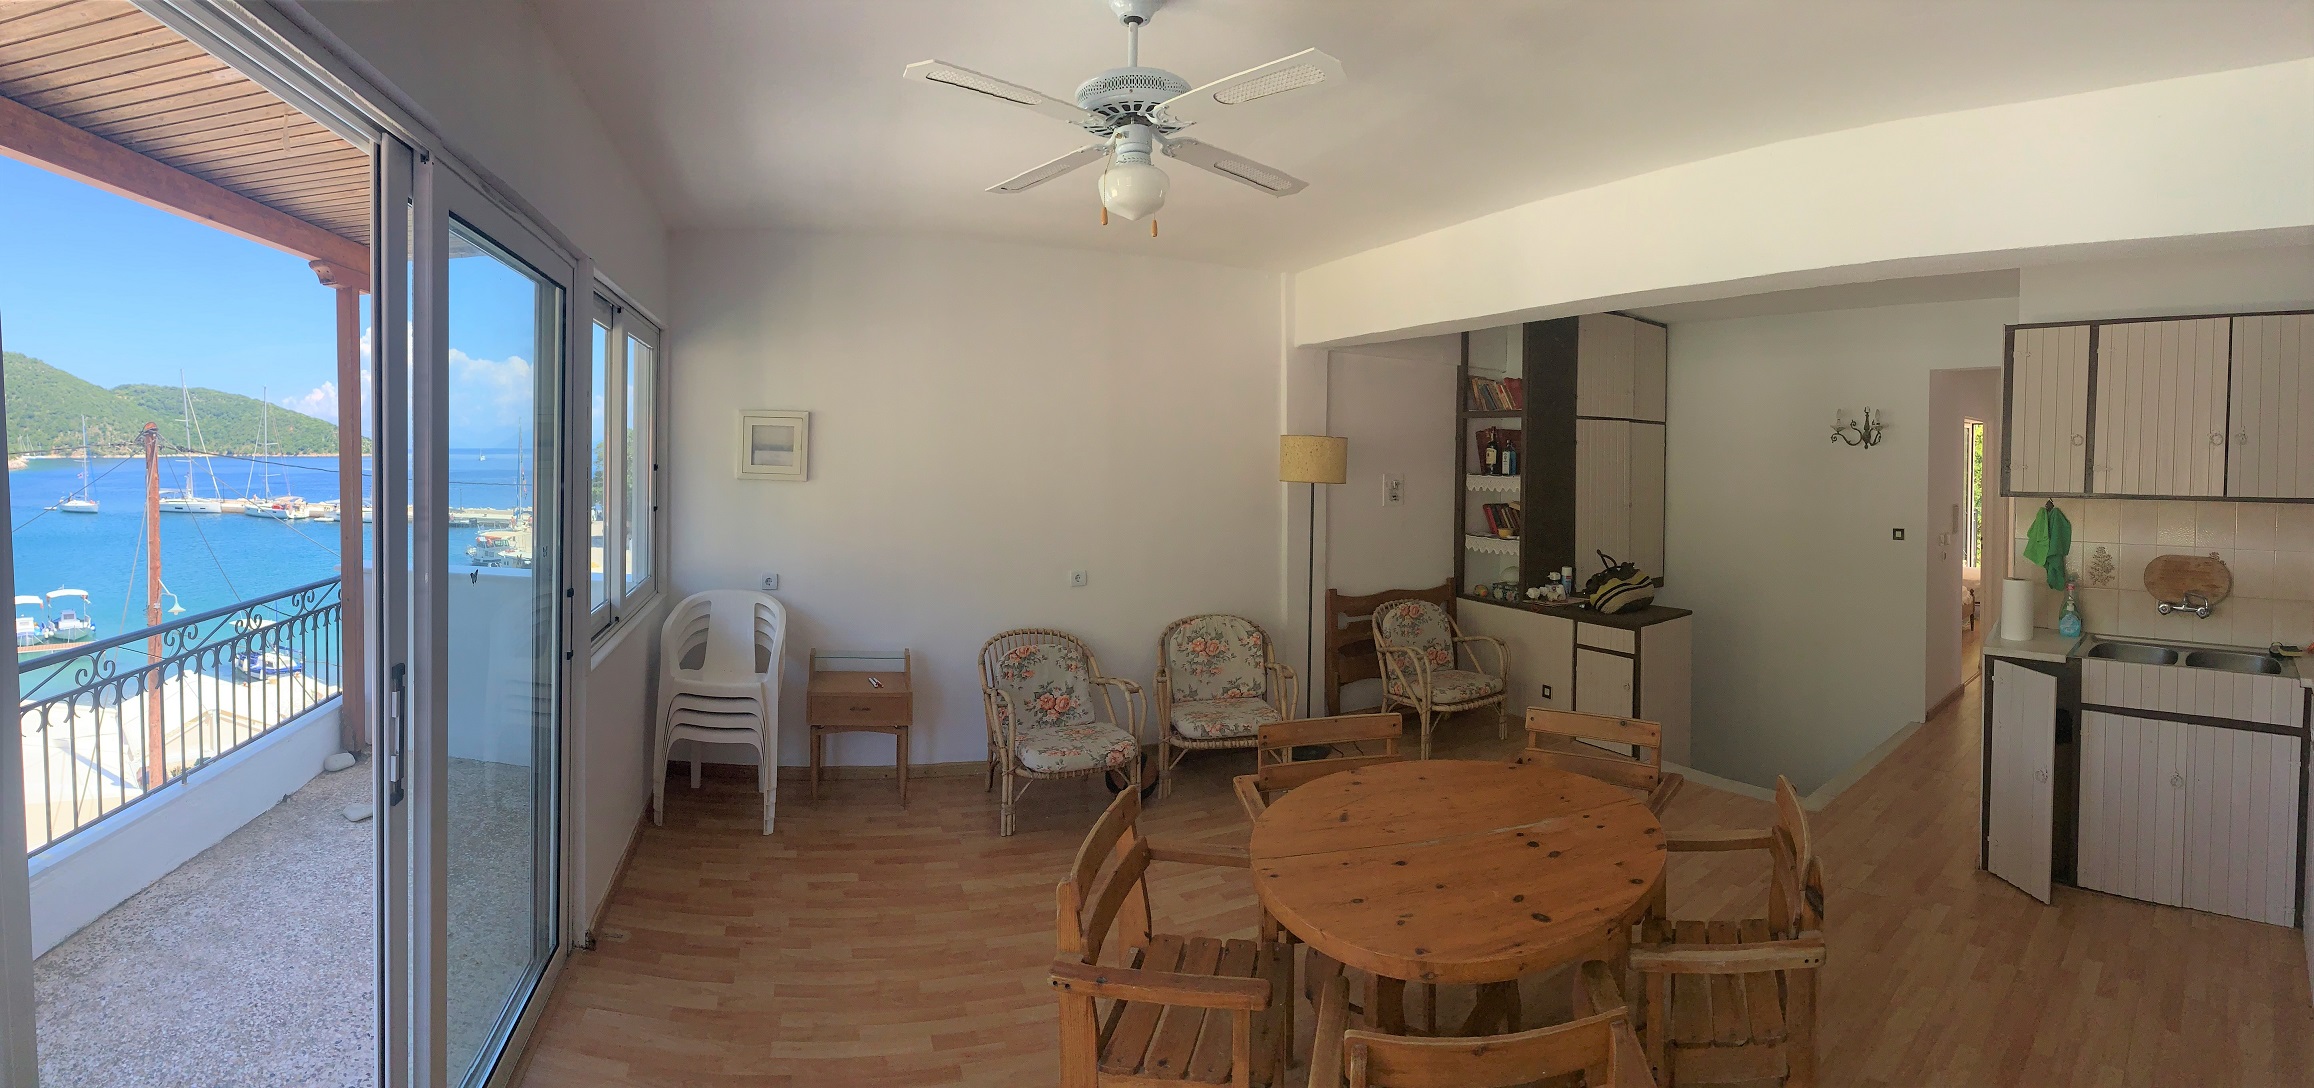 Living room area of house for sale in Ithaca Greece, Frikes